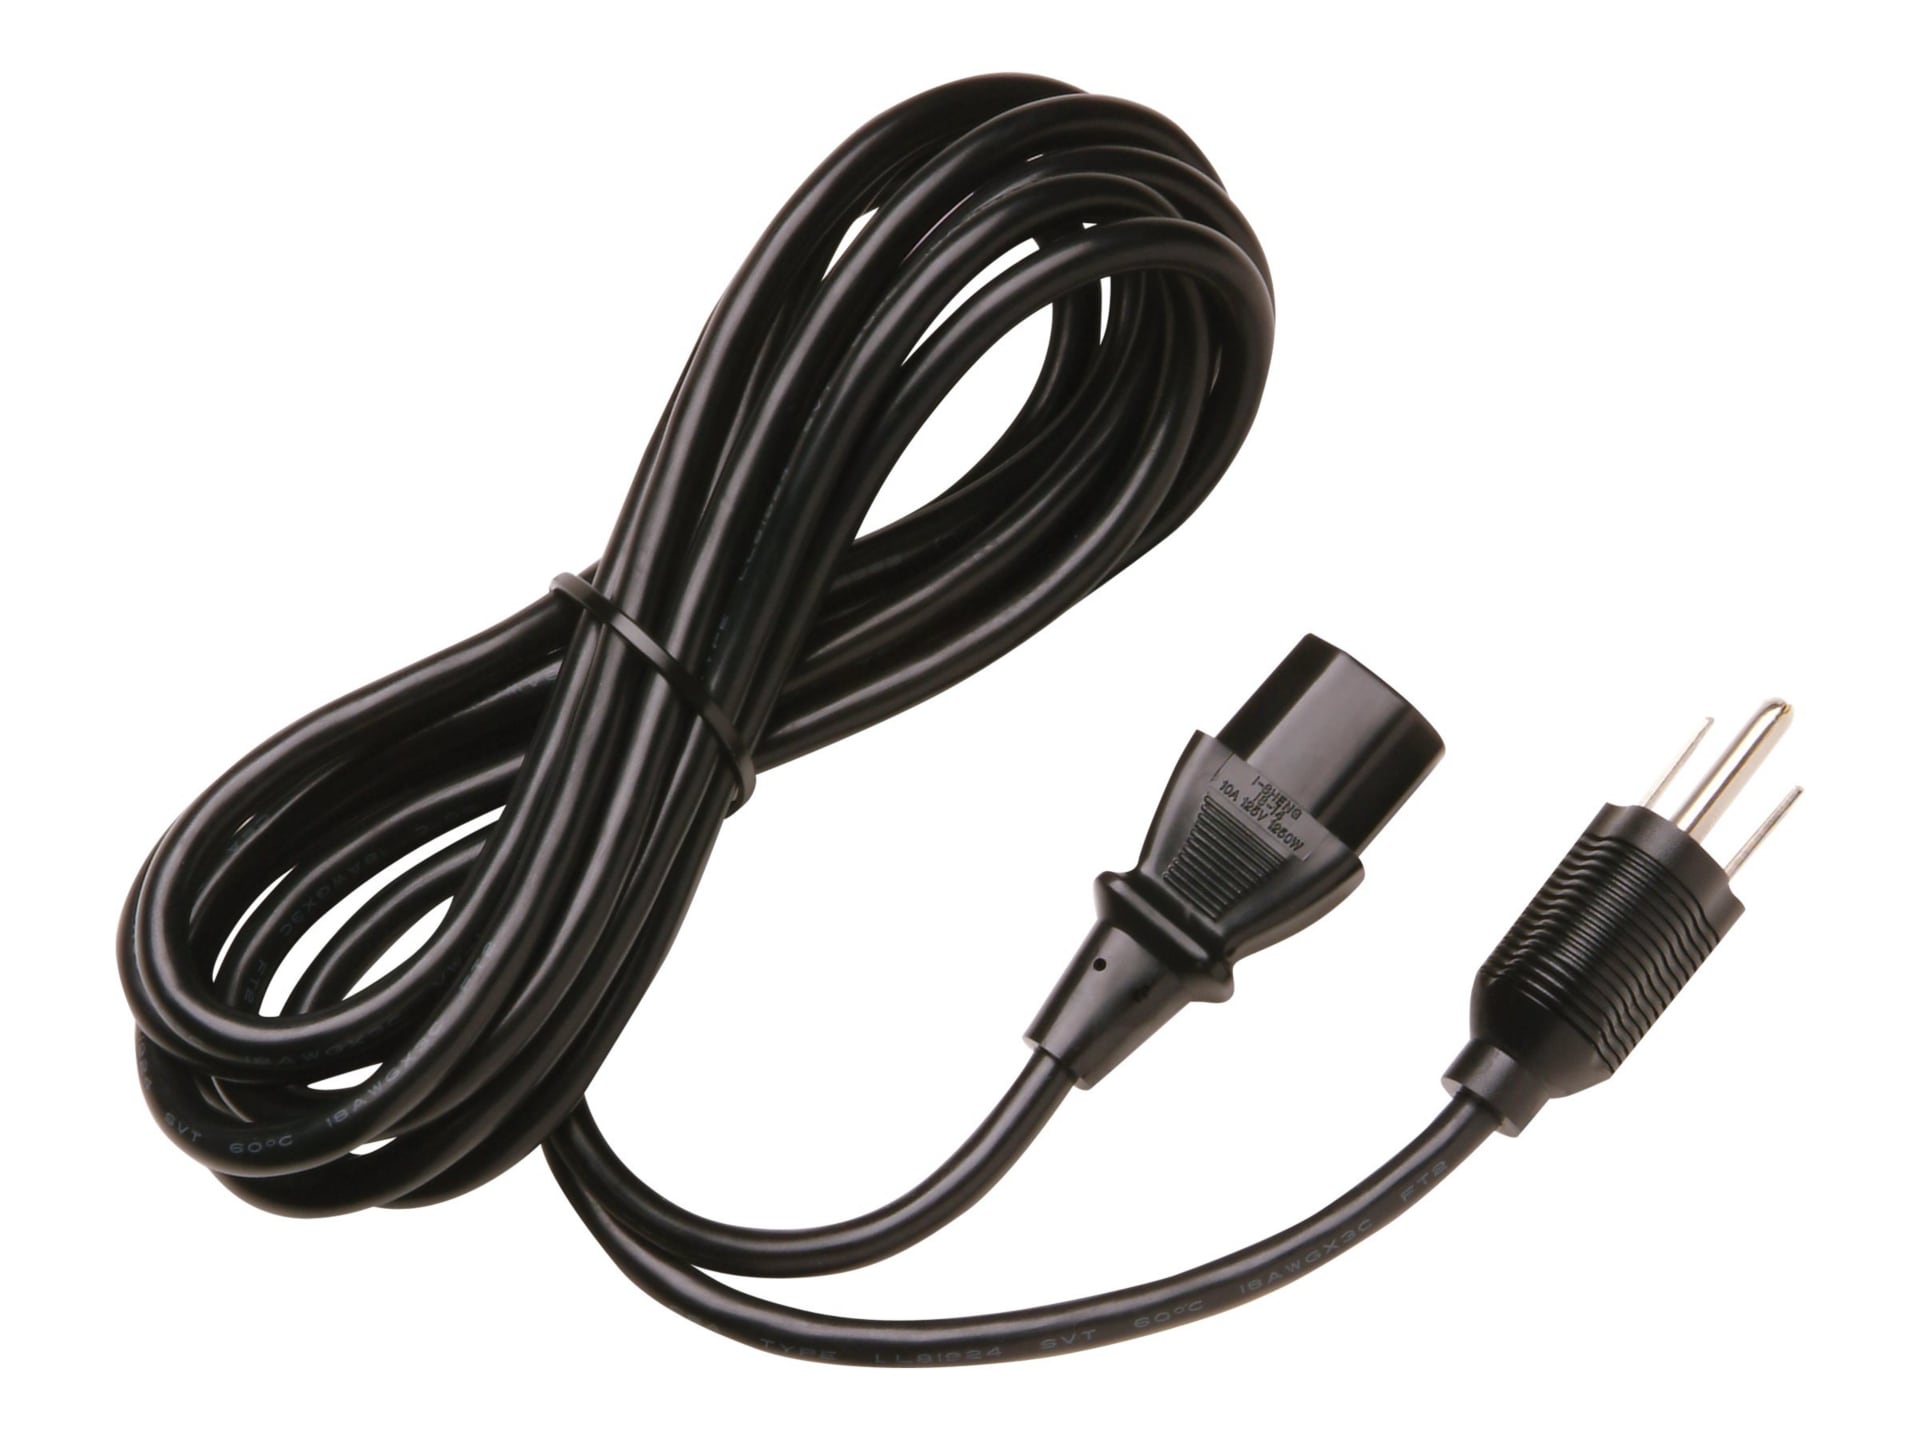 HPE power cable - 12 ft